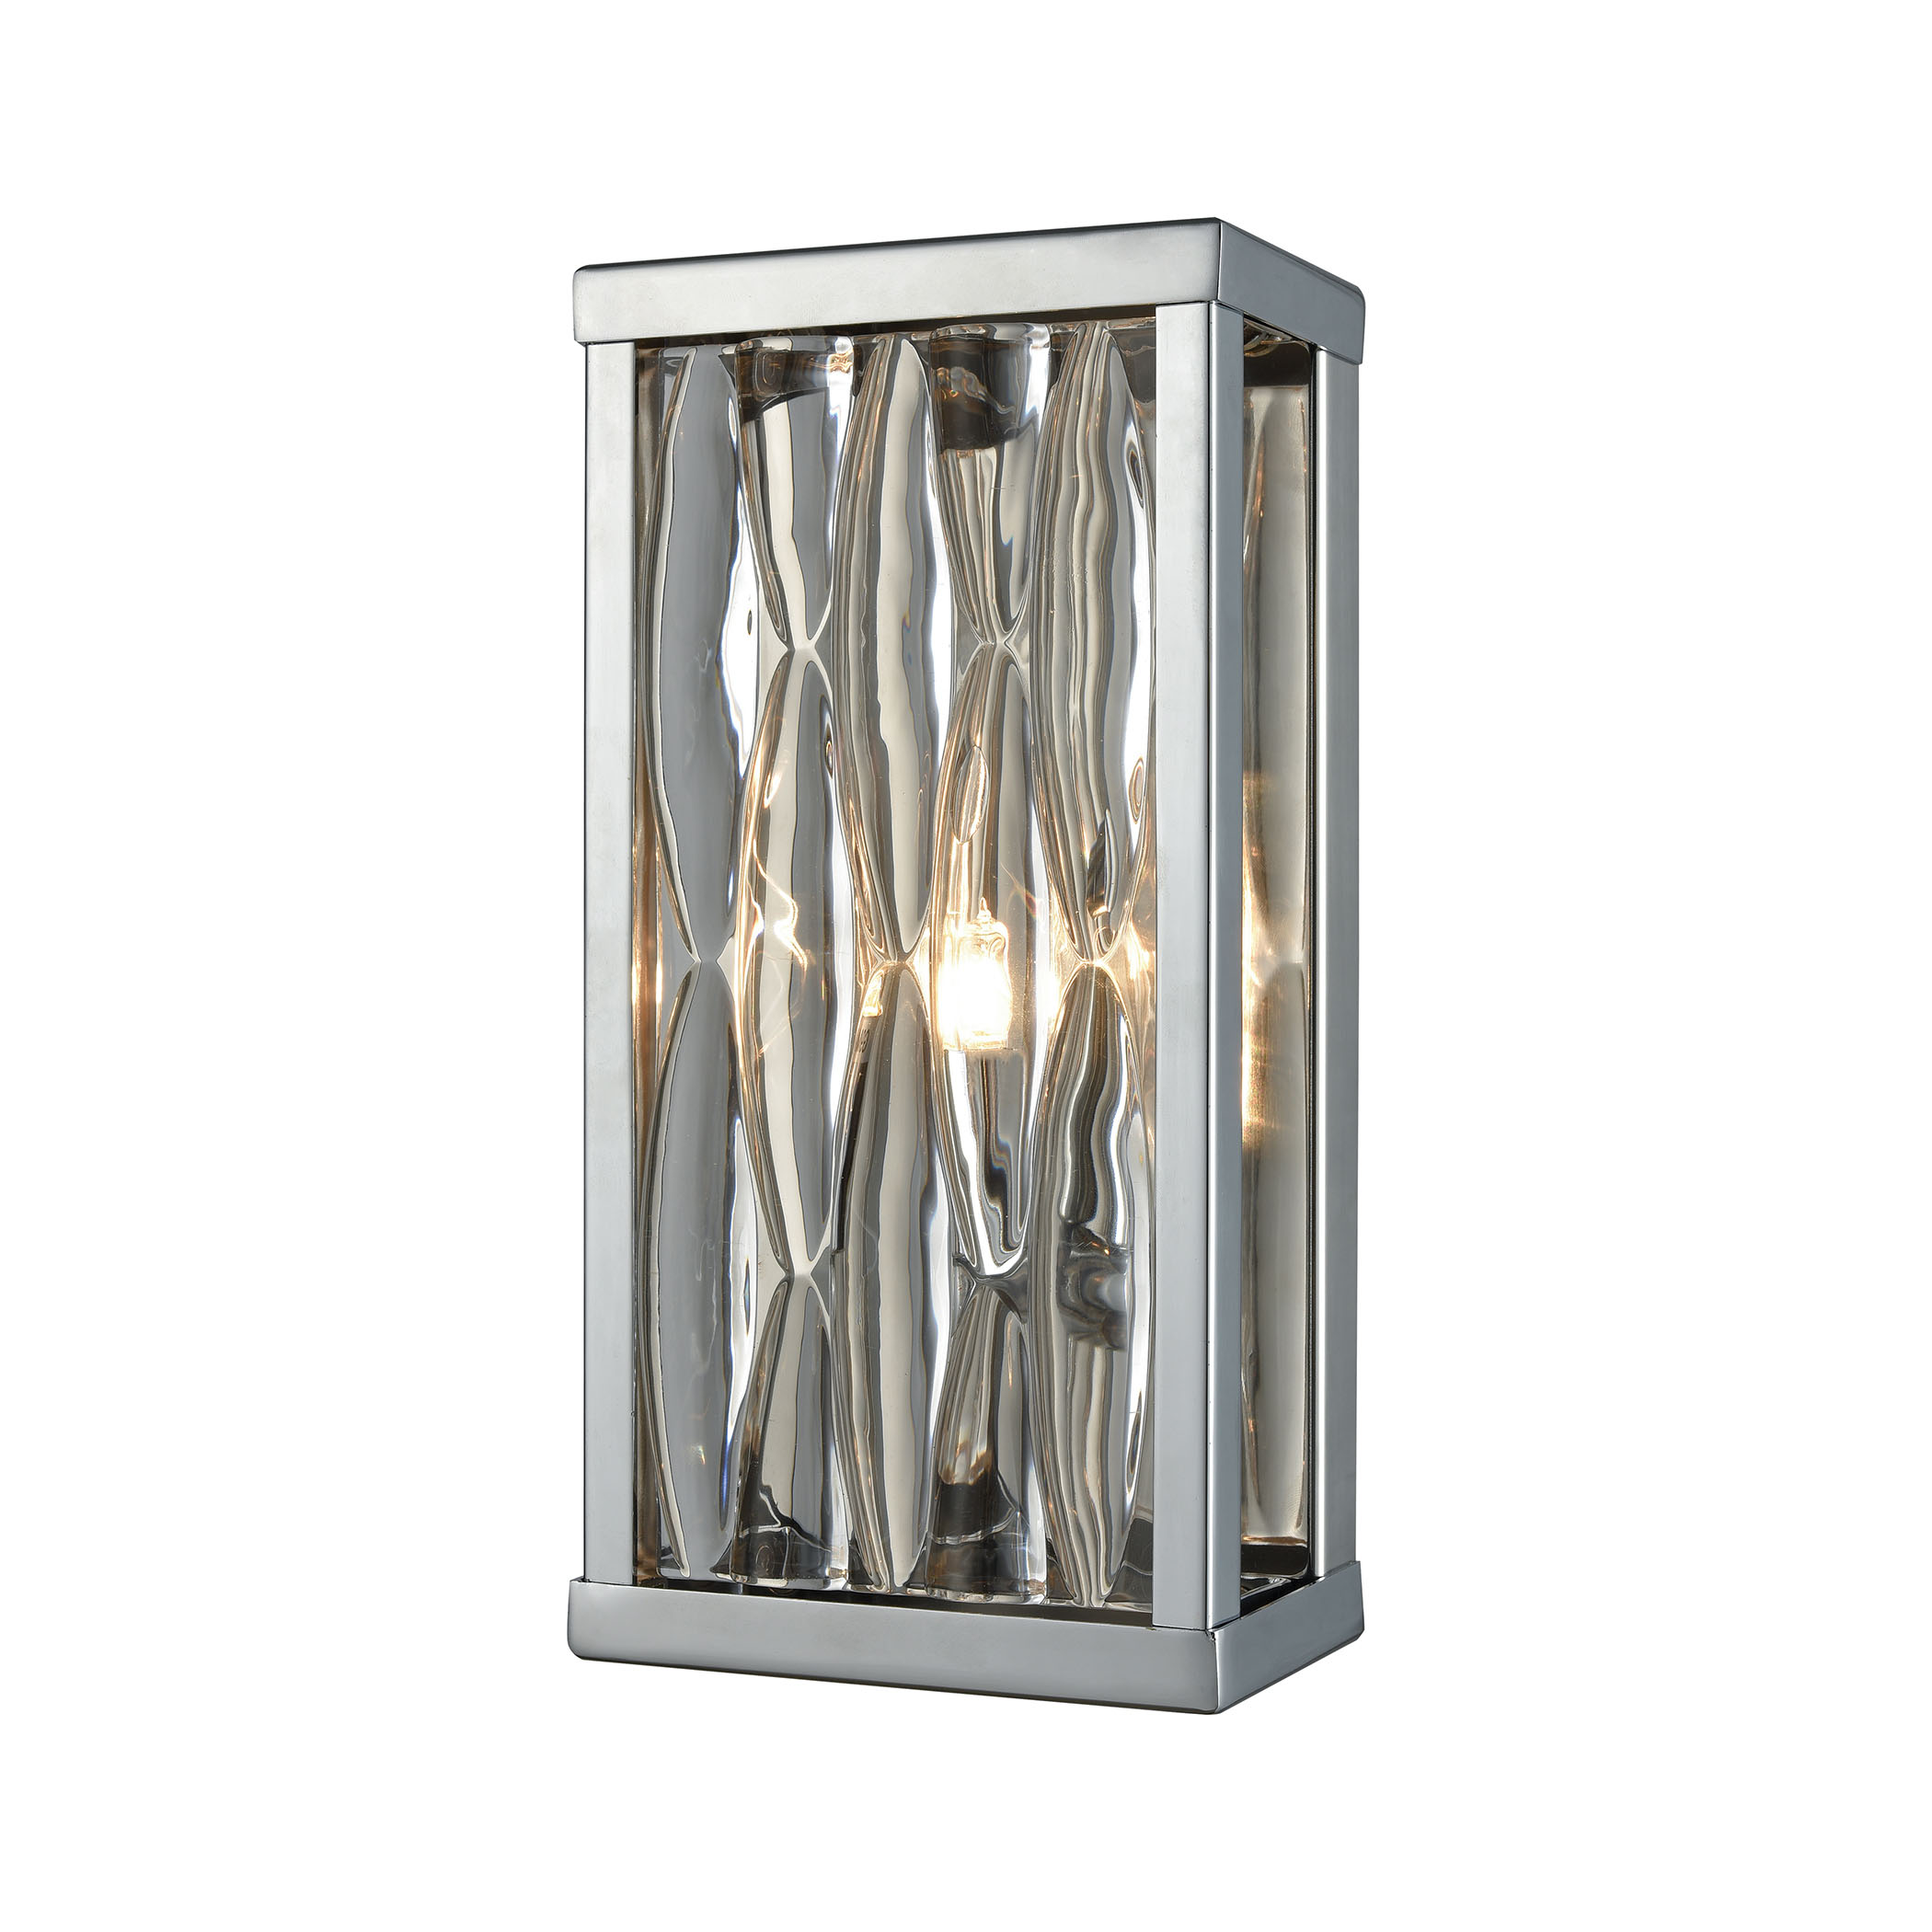 Riverflow 1 Light Vanity in Polished Chrome with Stacked River Stone Glass